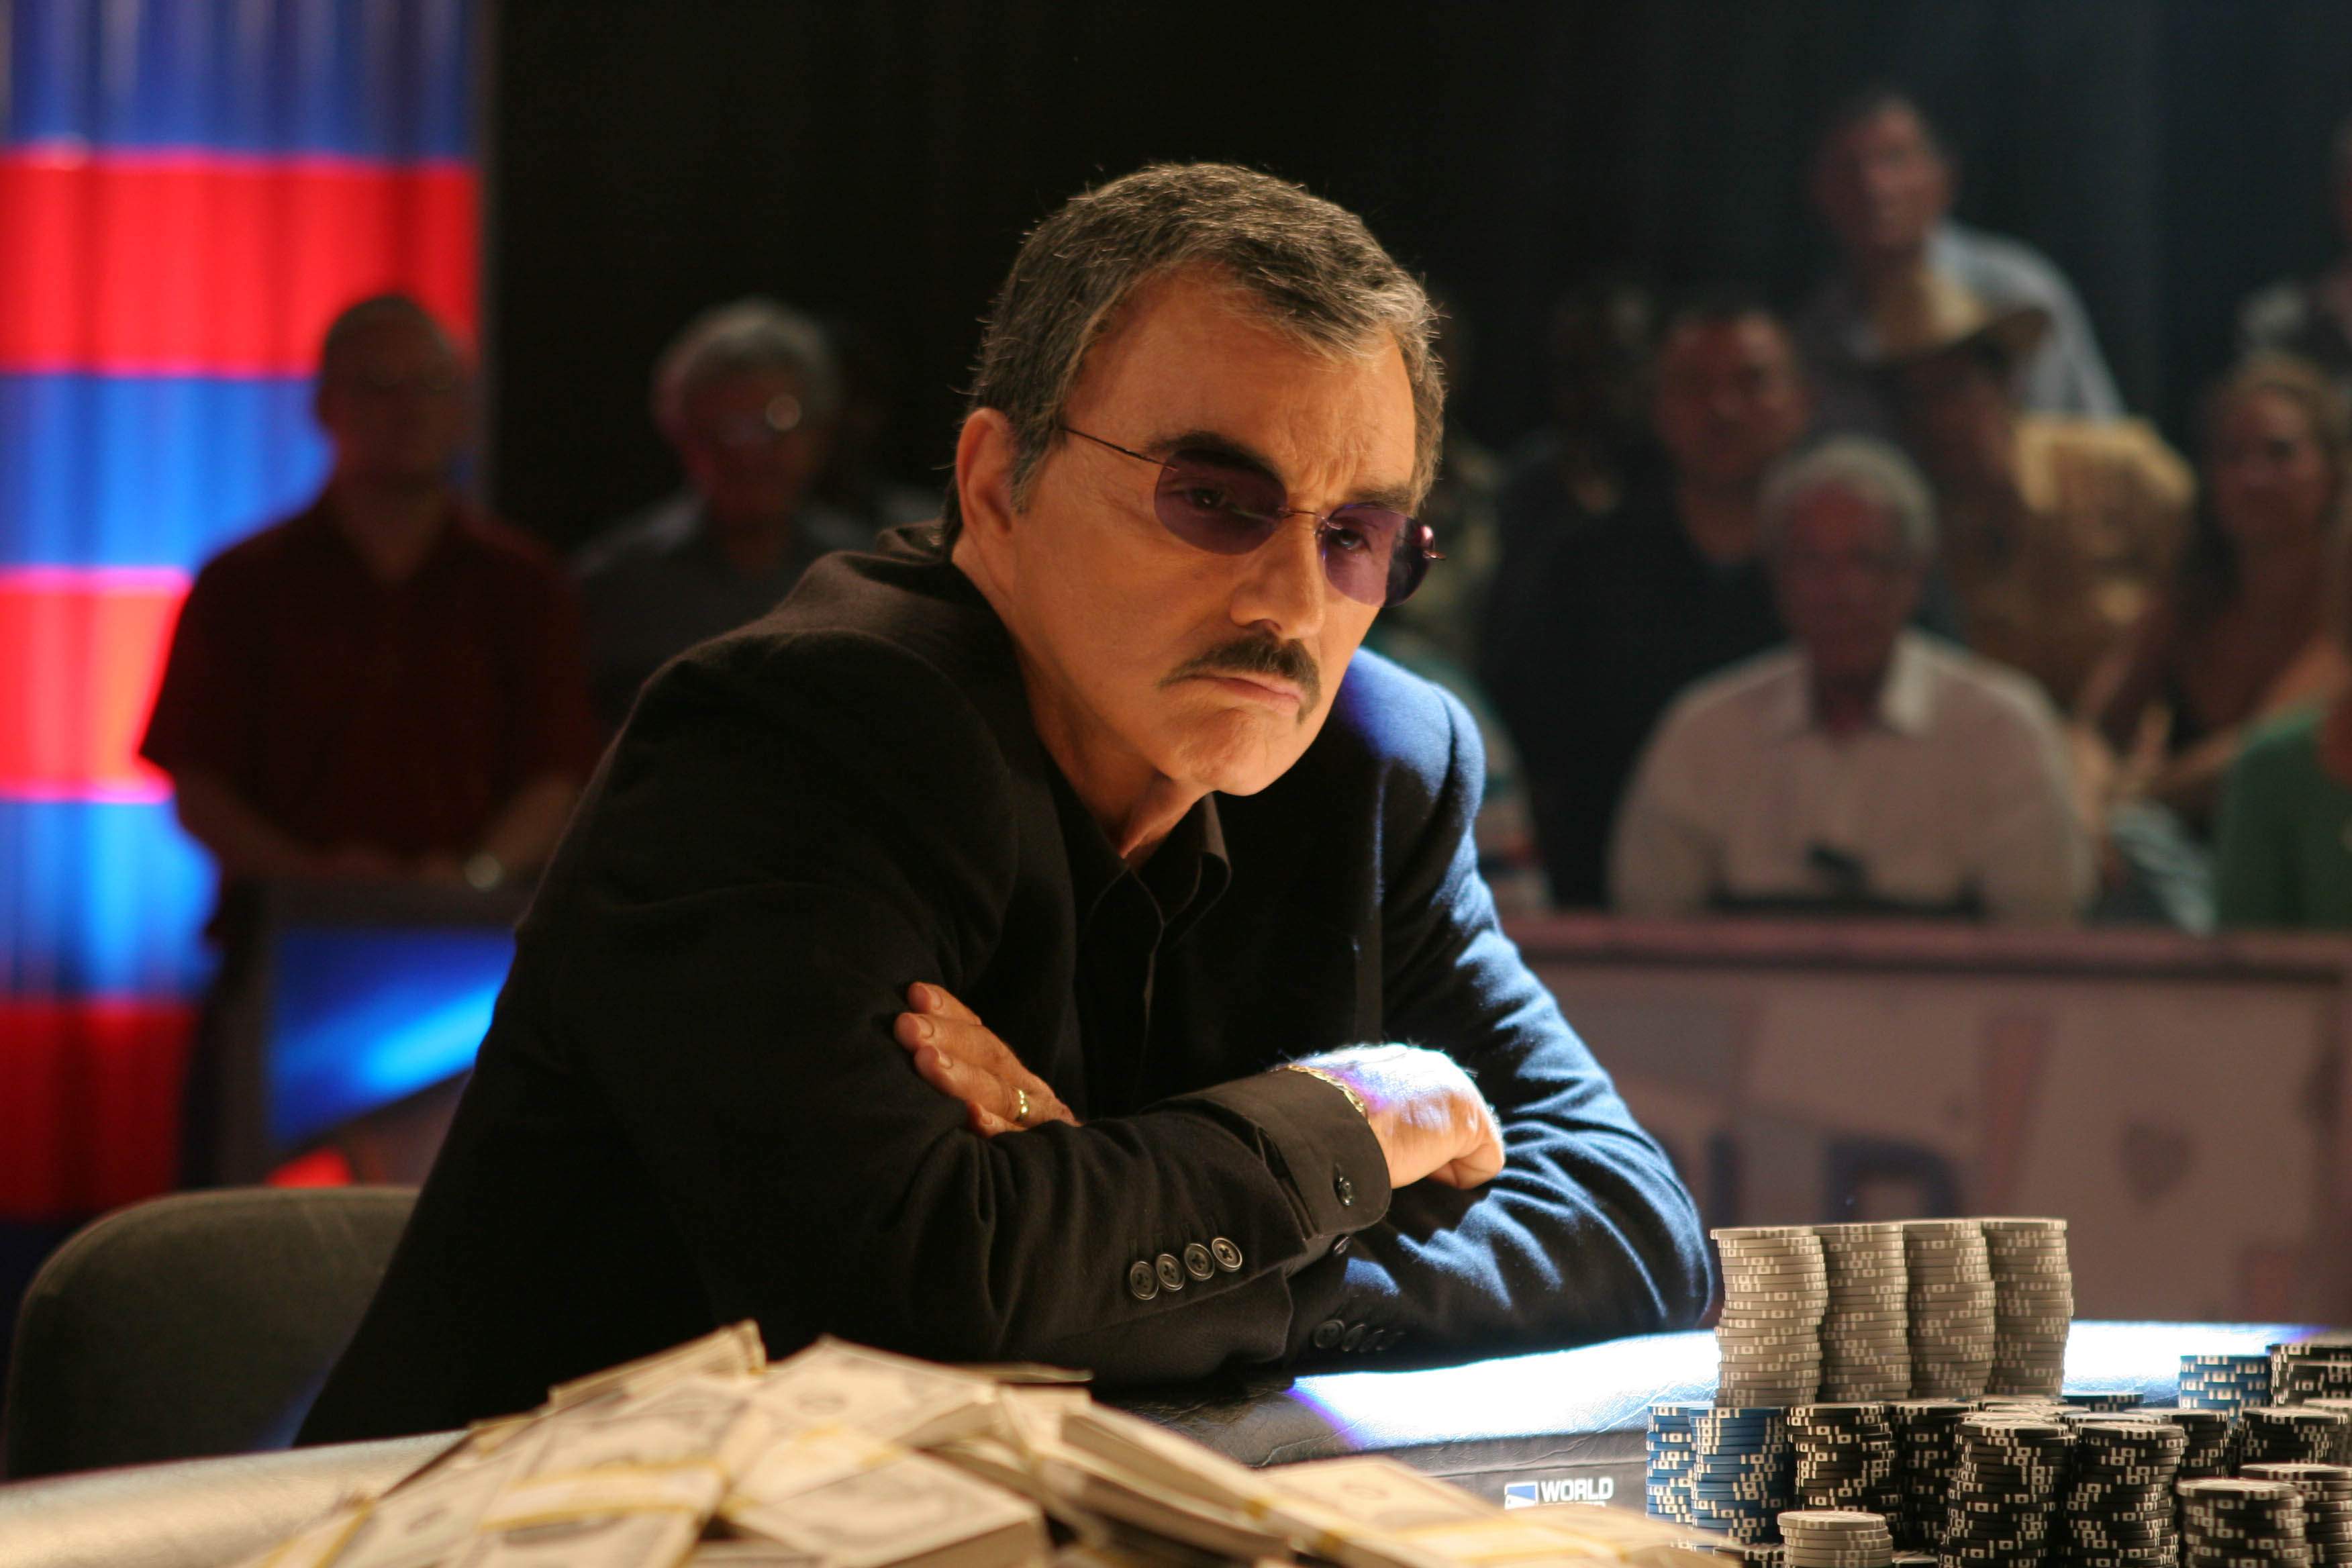 Burt Reynolds as Tommy in MGM's Deal (2008)